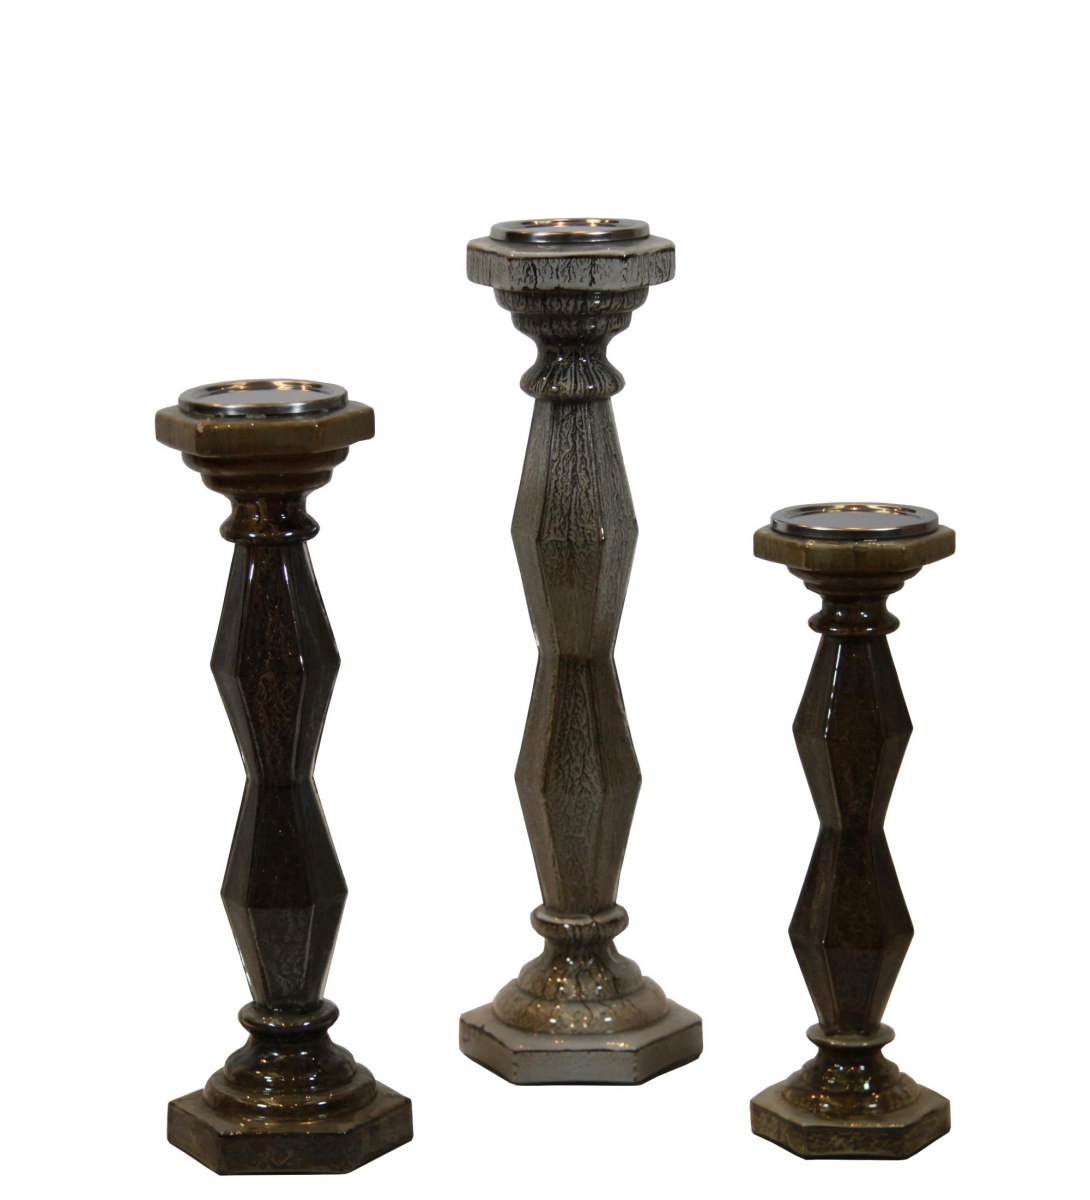 55046 Distressed Candle Holders, Grey - 3 Piece